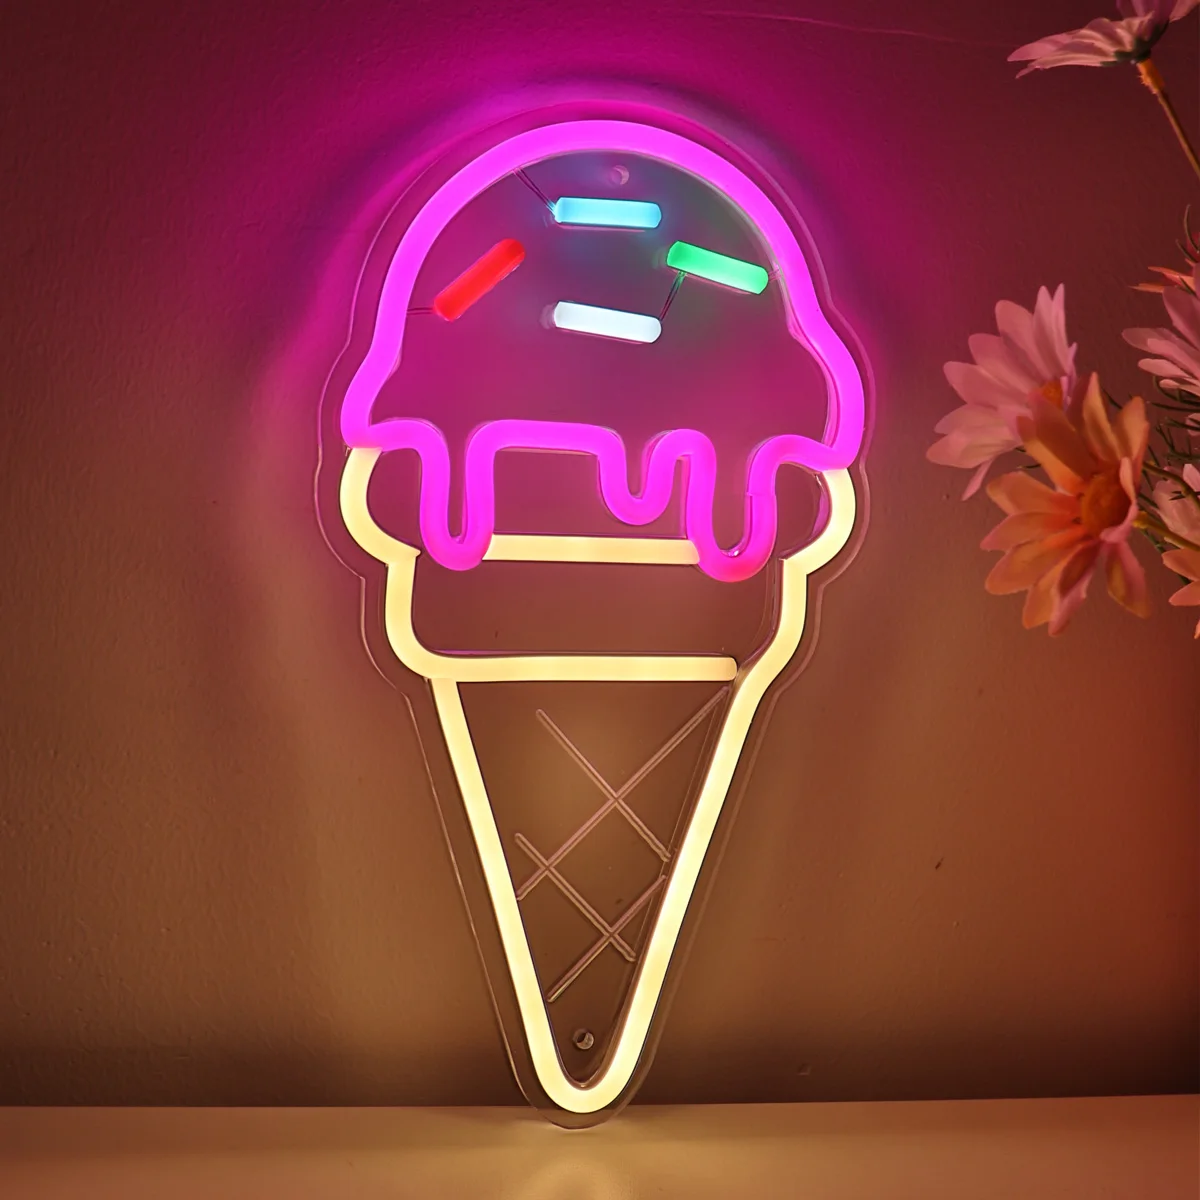 

1PC Ice-cream Cone With Sugar Sprinkles LED Wall Neon Sign For Shop Party Dessert Ice Cream Shop Decoration 6.46''*11.65''